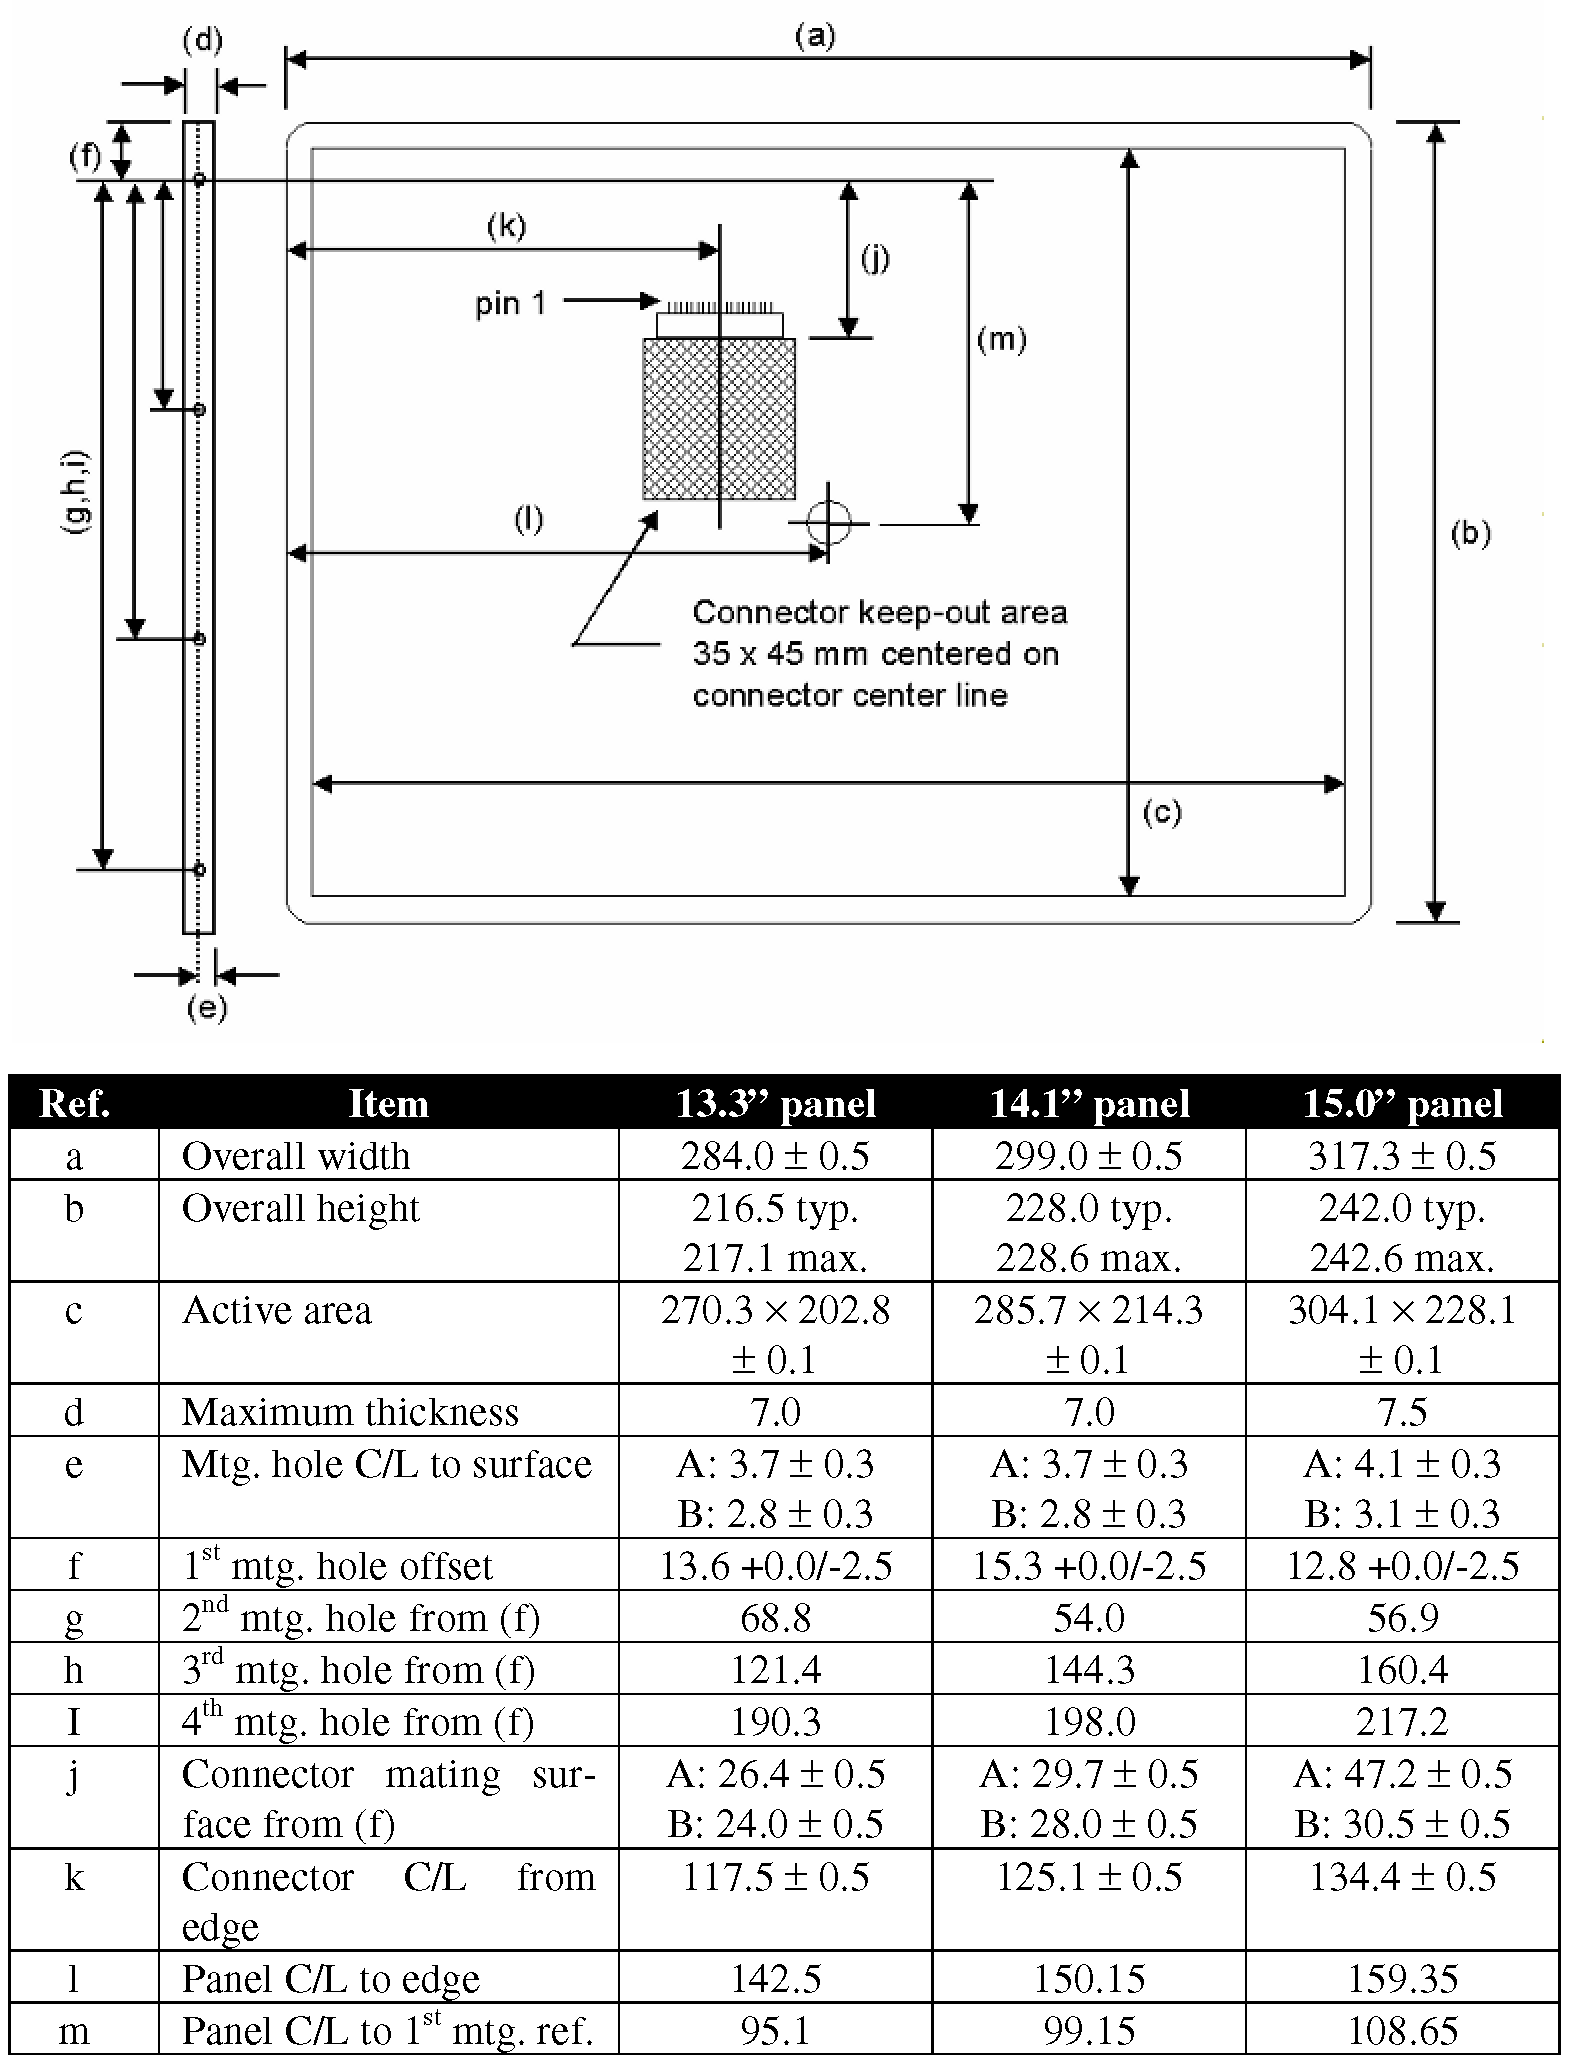 Summary of SPWG 2.0 mechanical specifications. All dimensions in mm. Tolerances ± 0.3 mm unless otherwise indicated. Note: The SPWG 2.0 specification established two different panel types, referred to as “A” and “B”, with differences as noted above. The “B” style, which is proposed for all designs from 2003 on, is intended to encourage a move toward thinner panels.